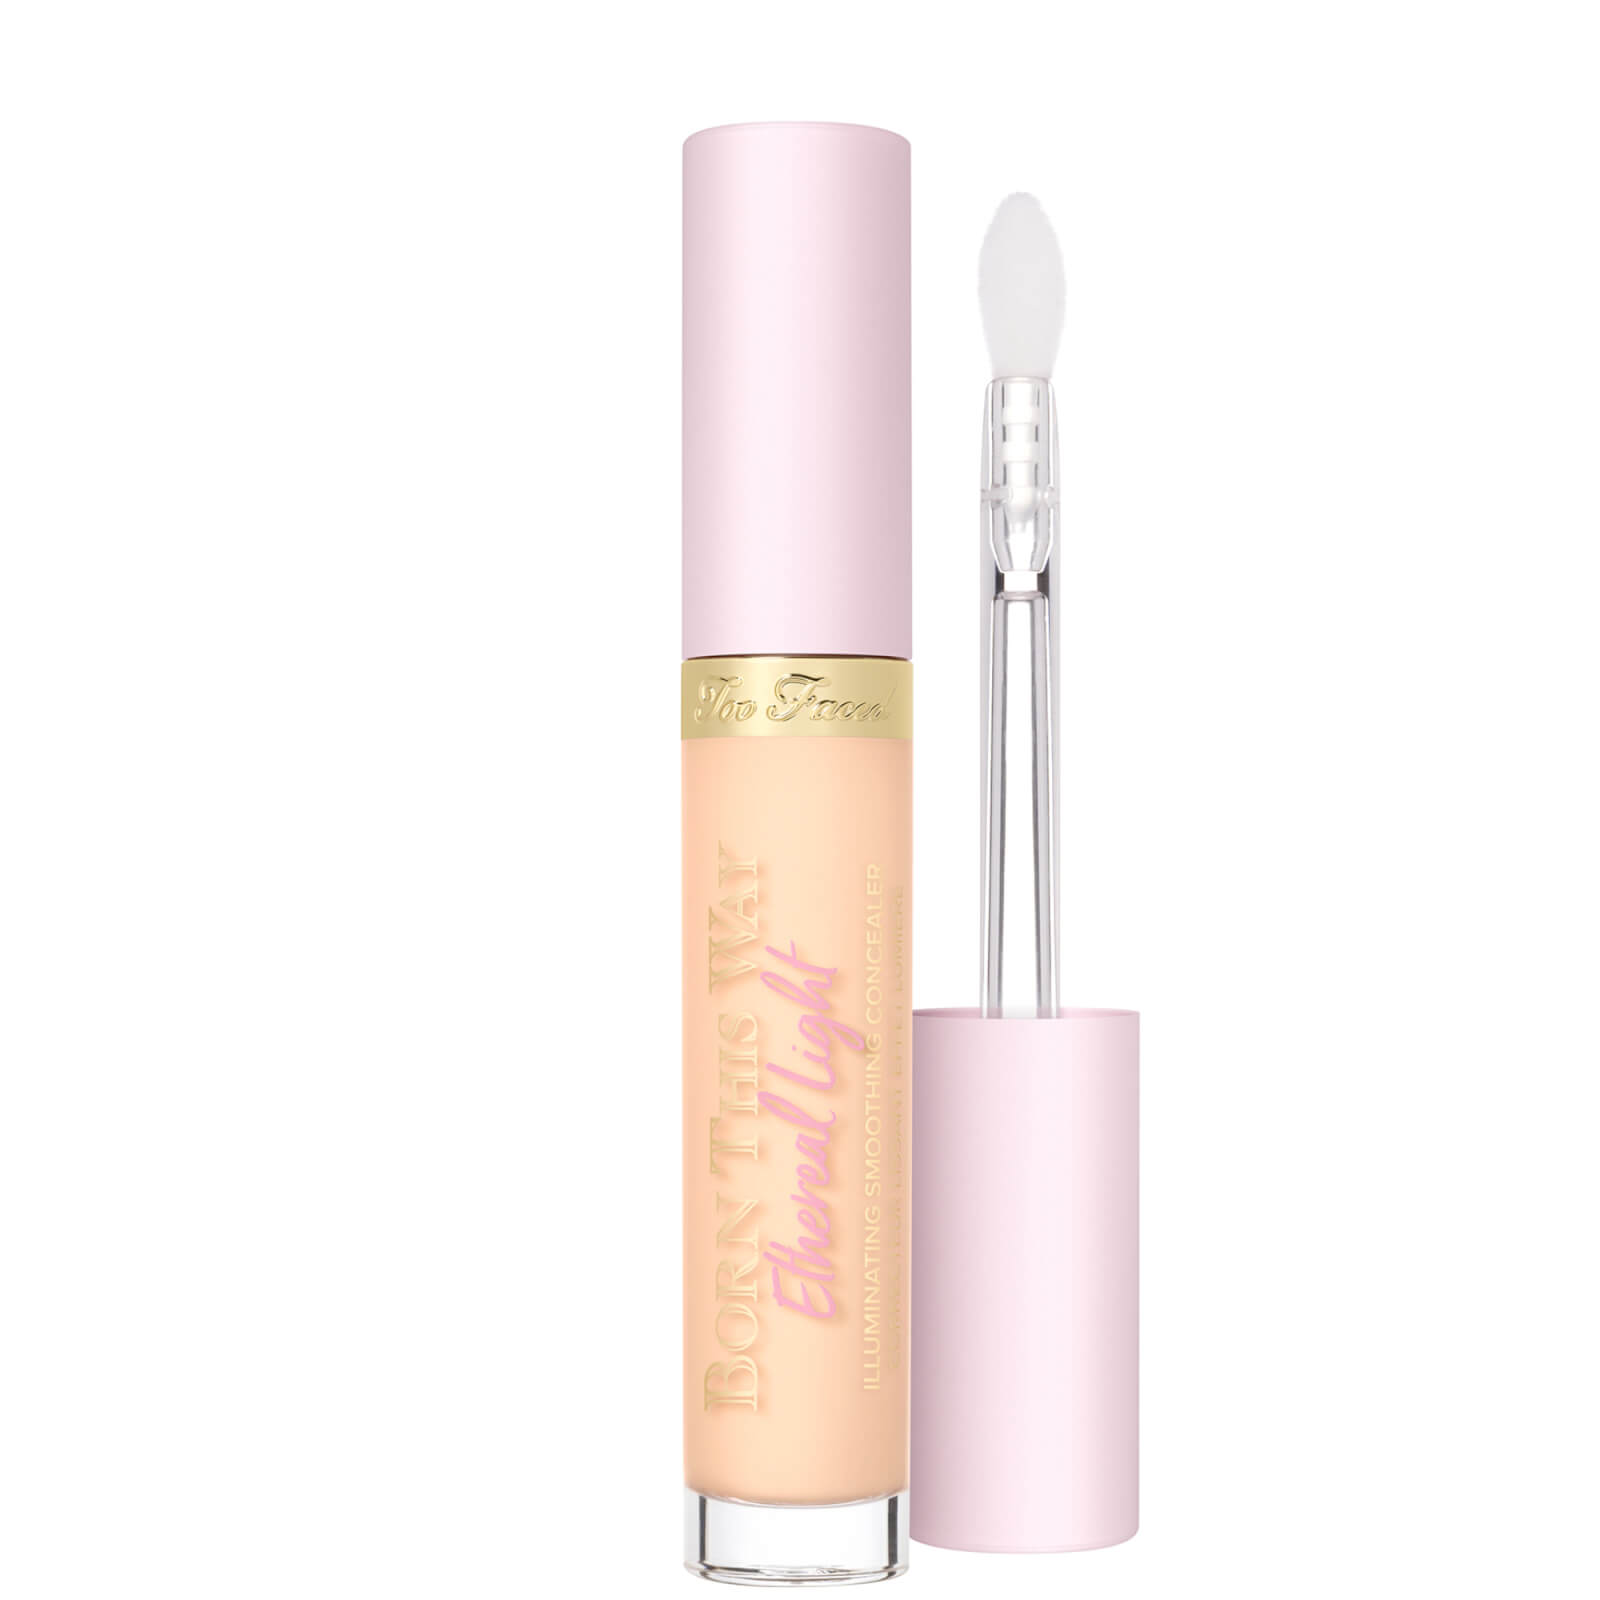 Too Faced Born This Way Ethereal Light Illuminating Smoothing Concealer 15ml (Various Shades) - Buttercup